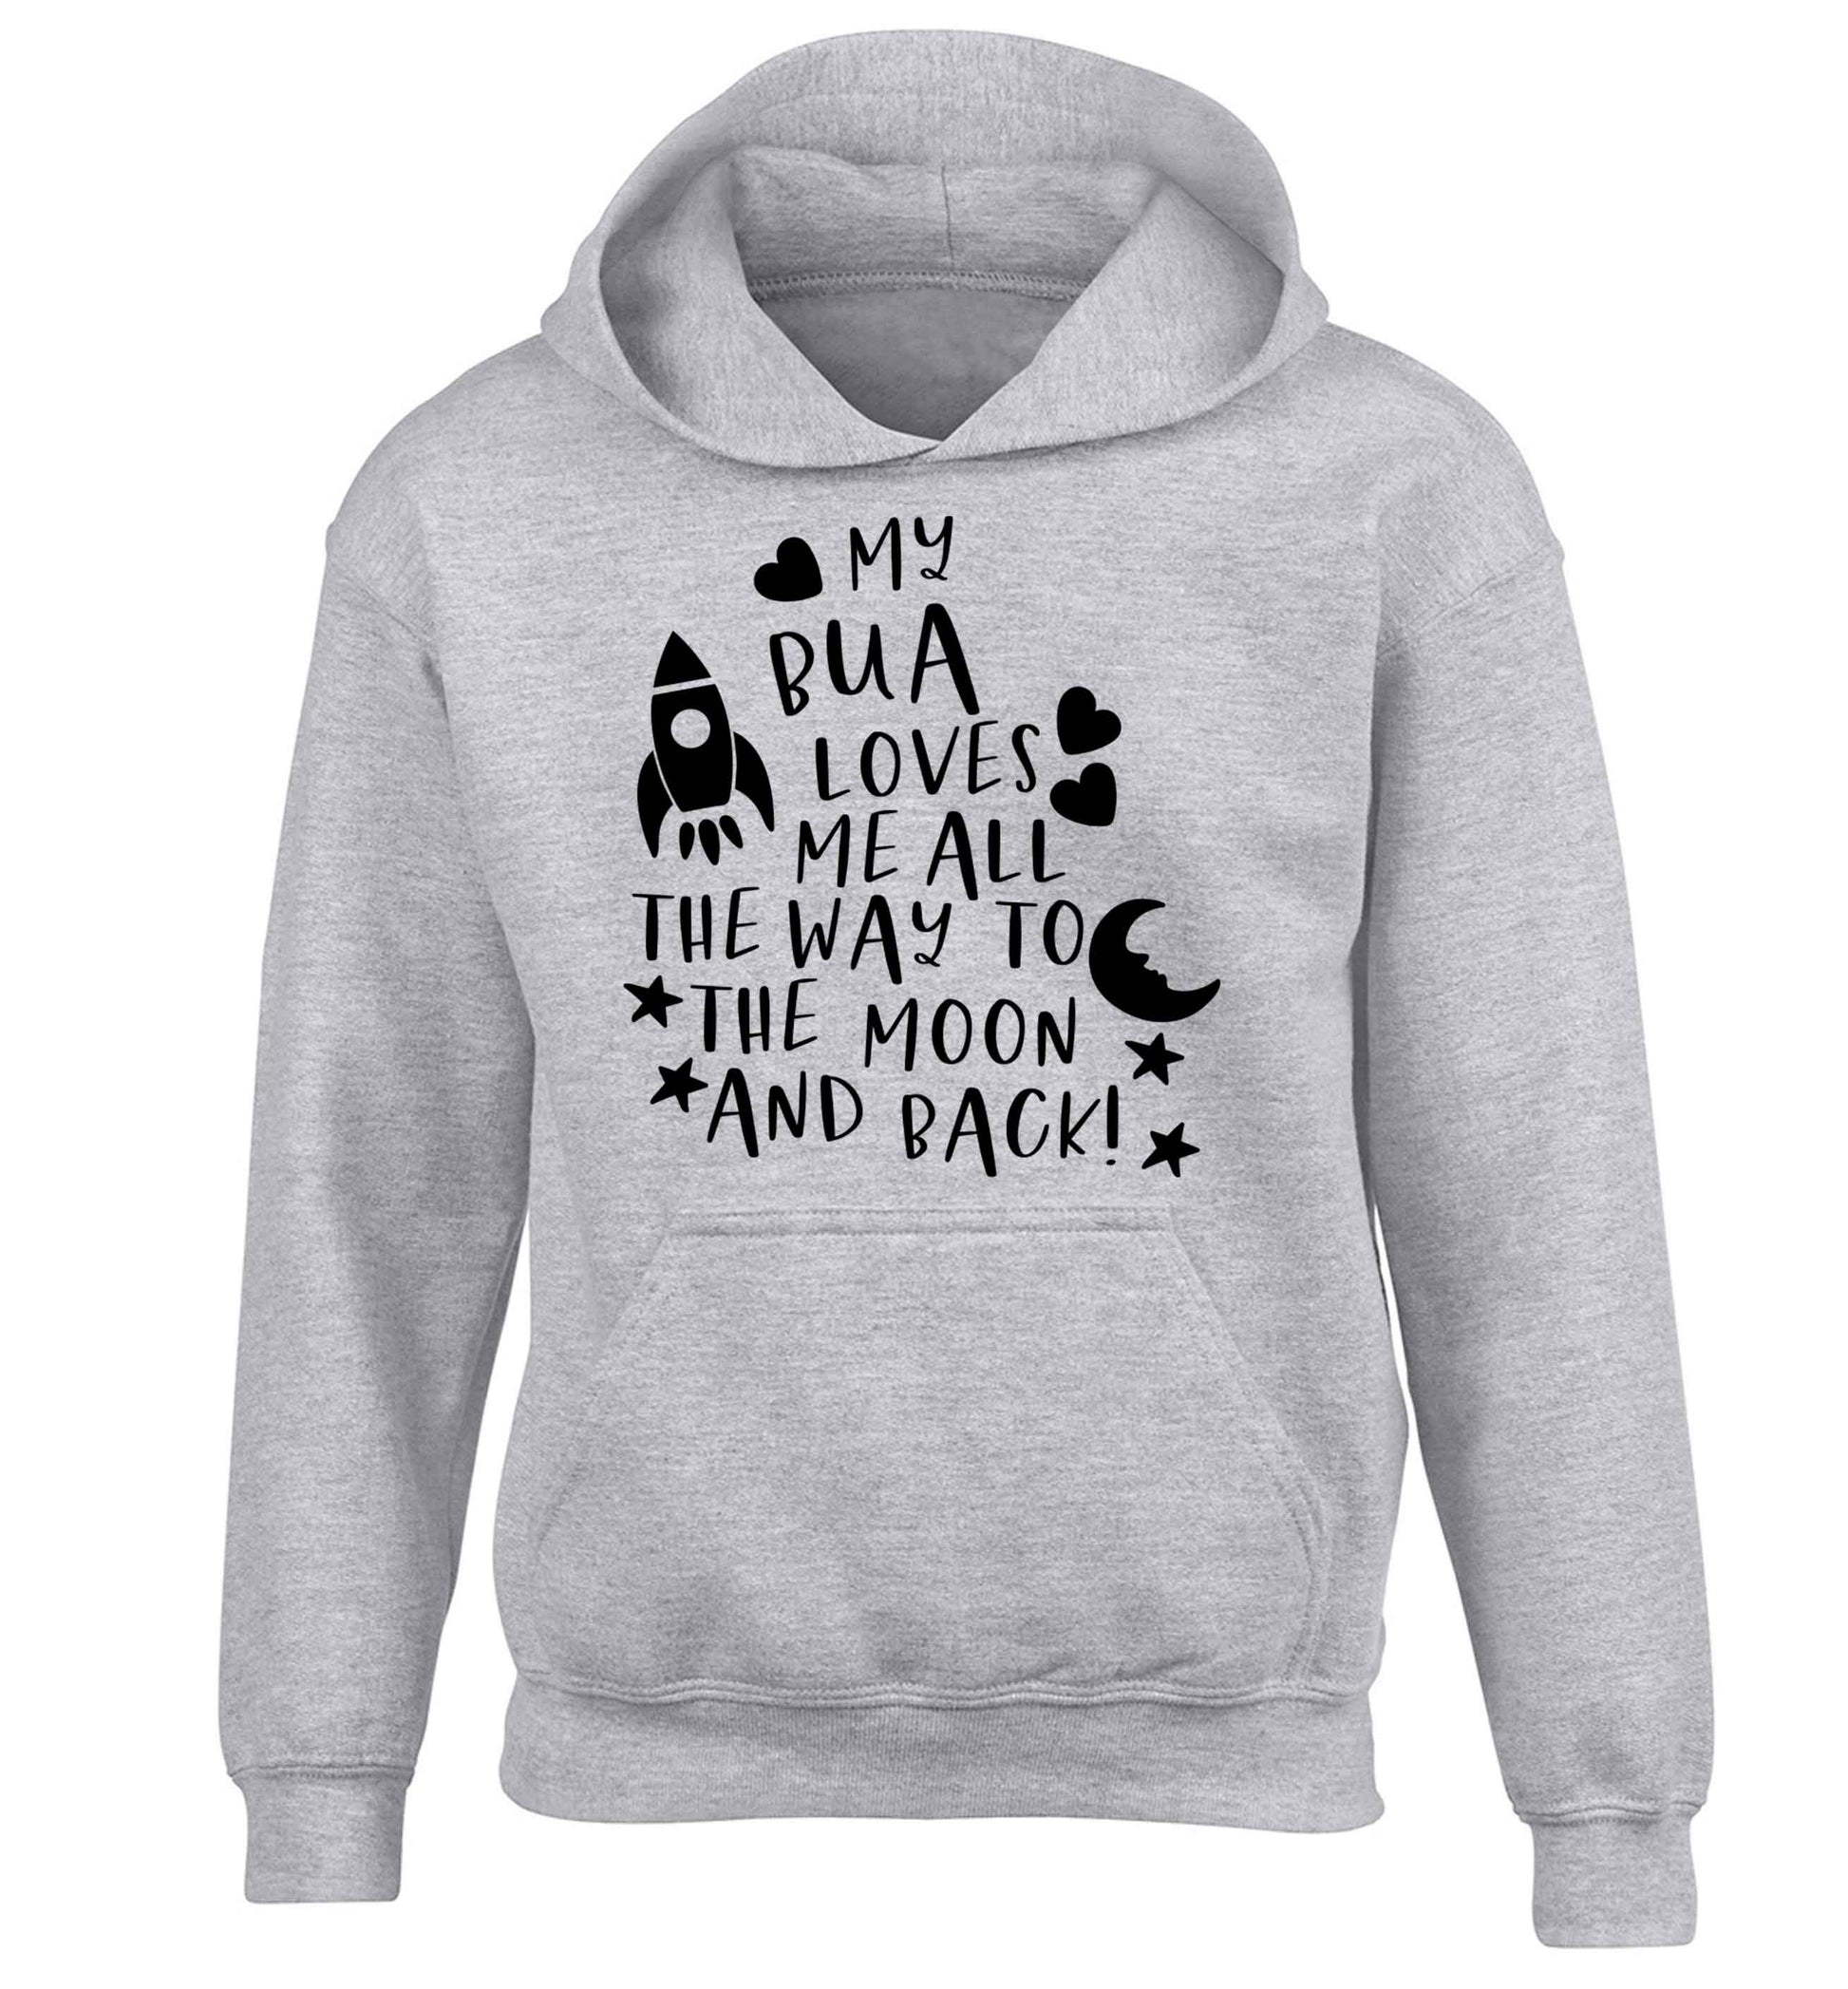 My bua loves me all they way to the moon and back children's grey hoodie 12-13 Years